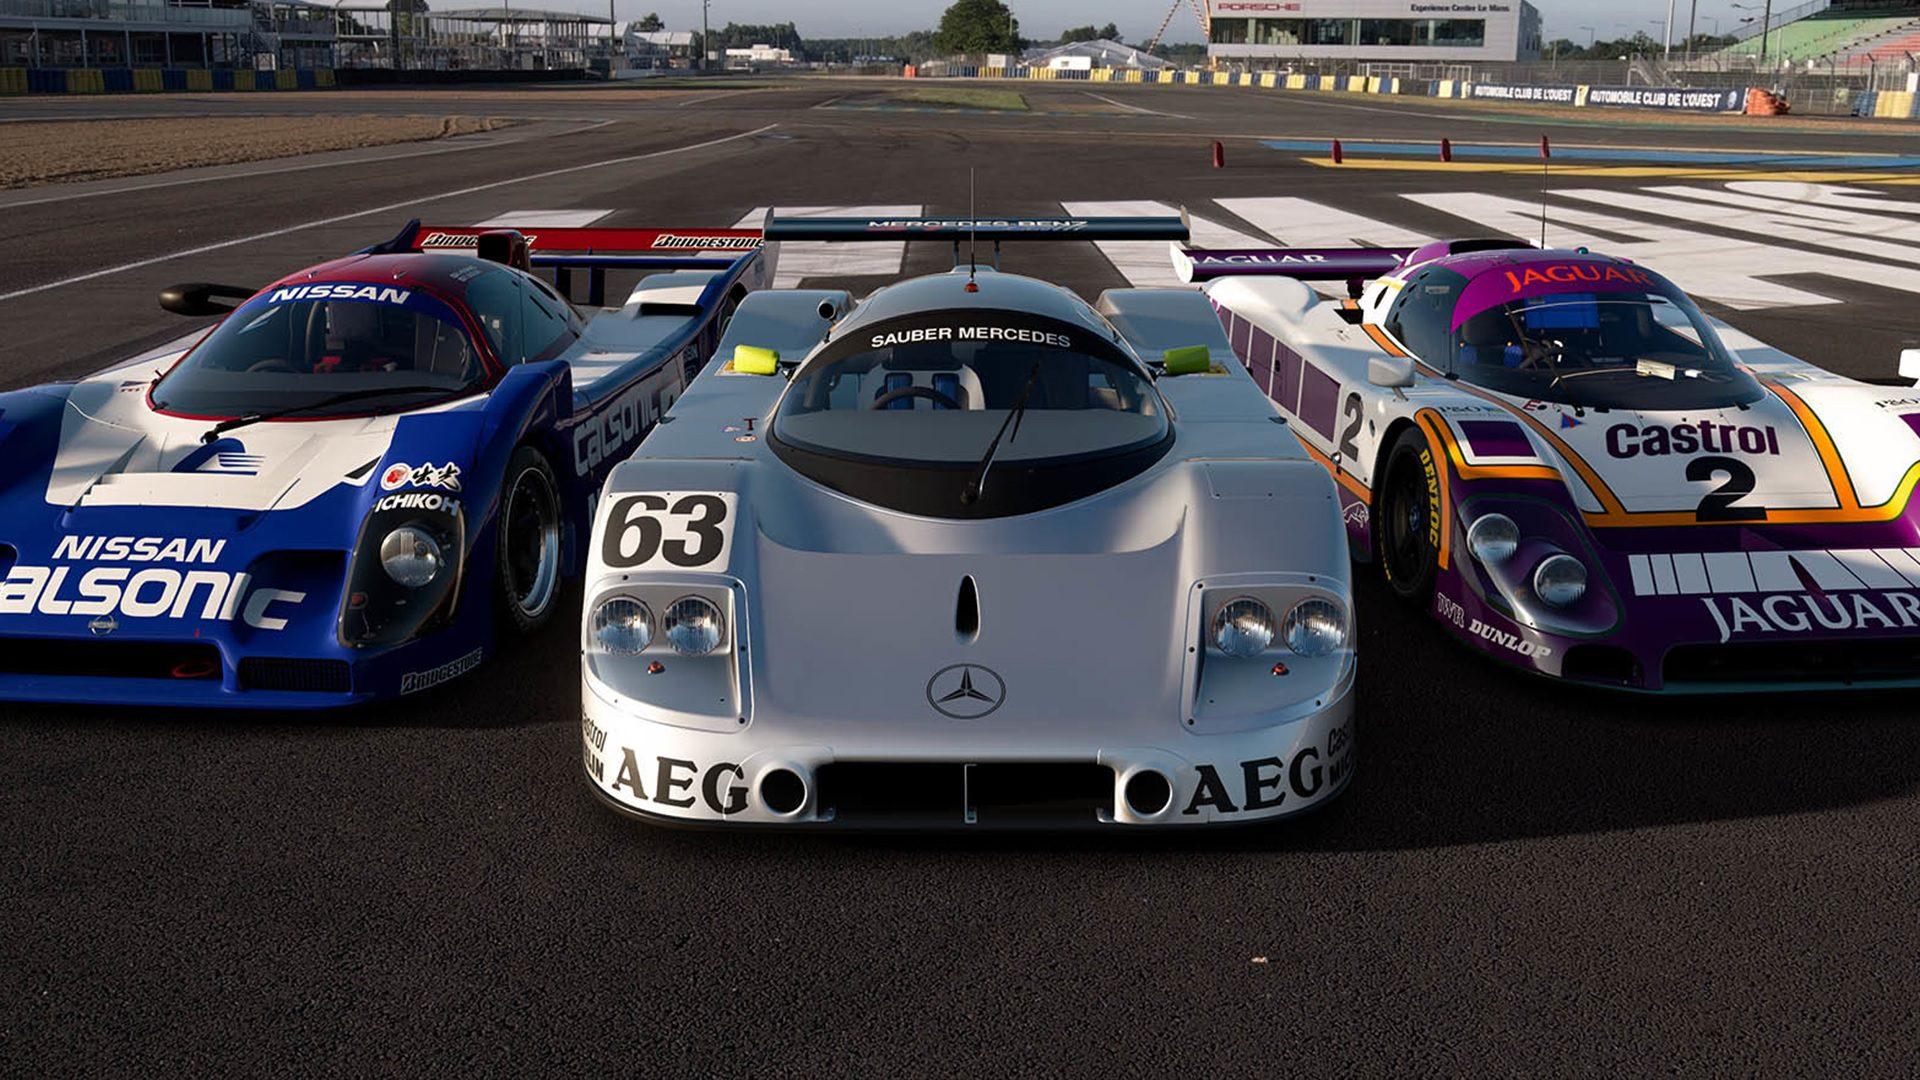 Review: Gran Turismo 7 – PS5 - The Checkered Flag